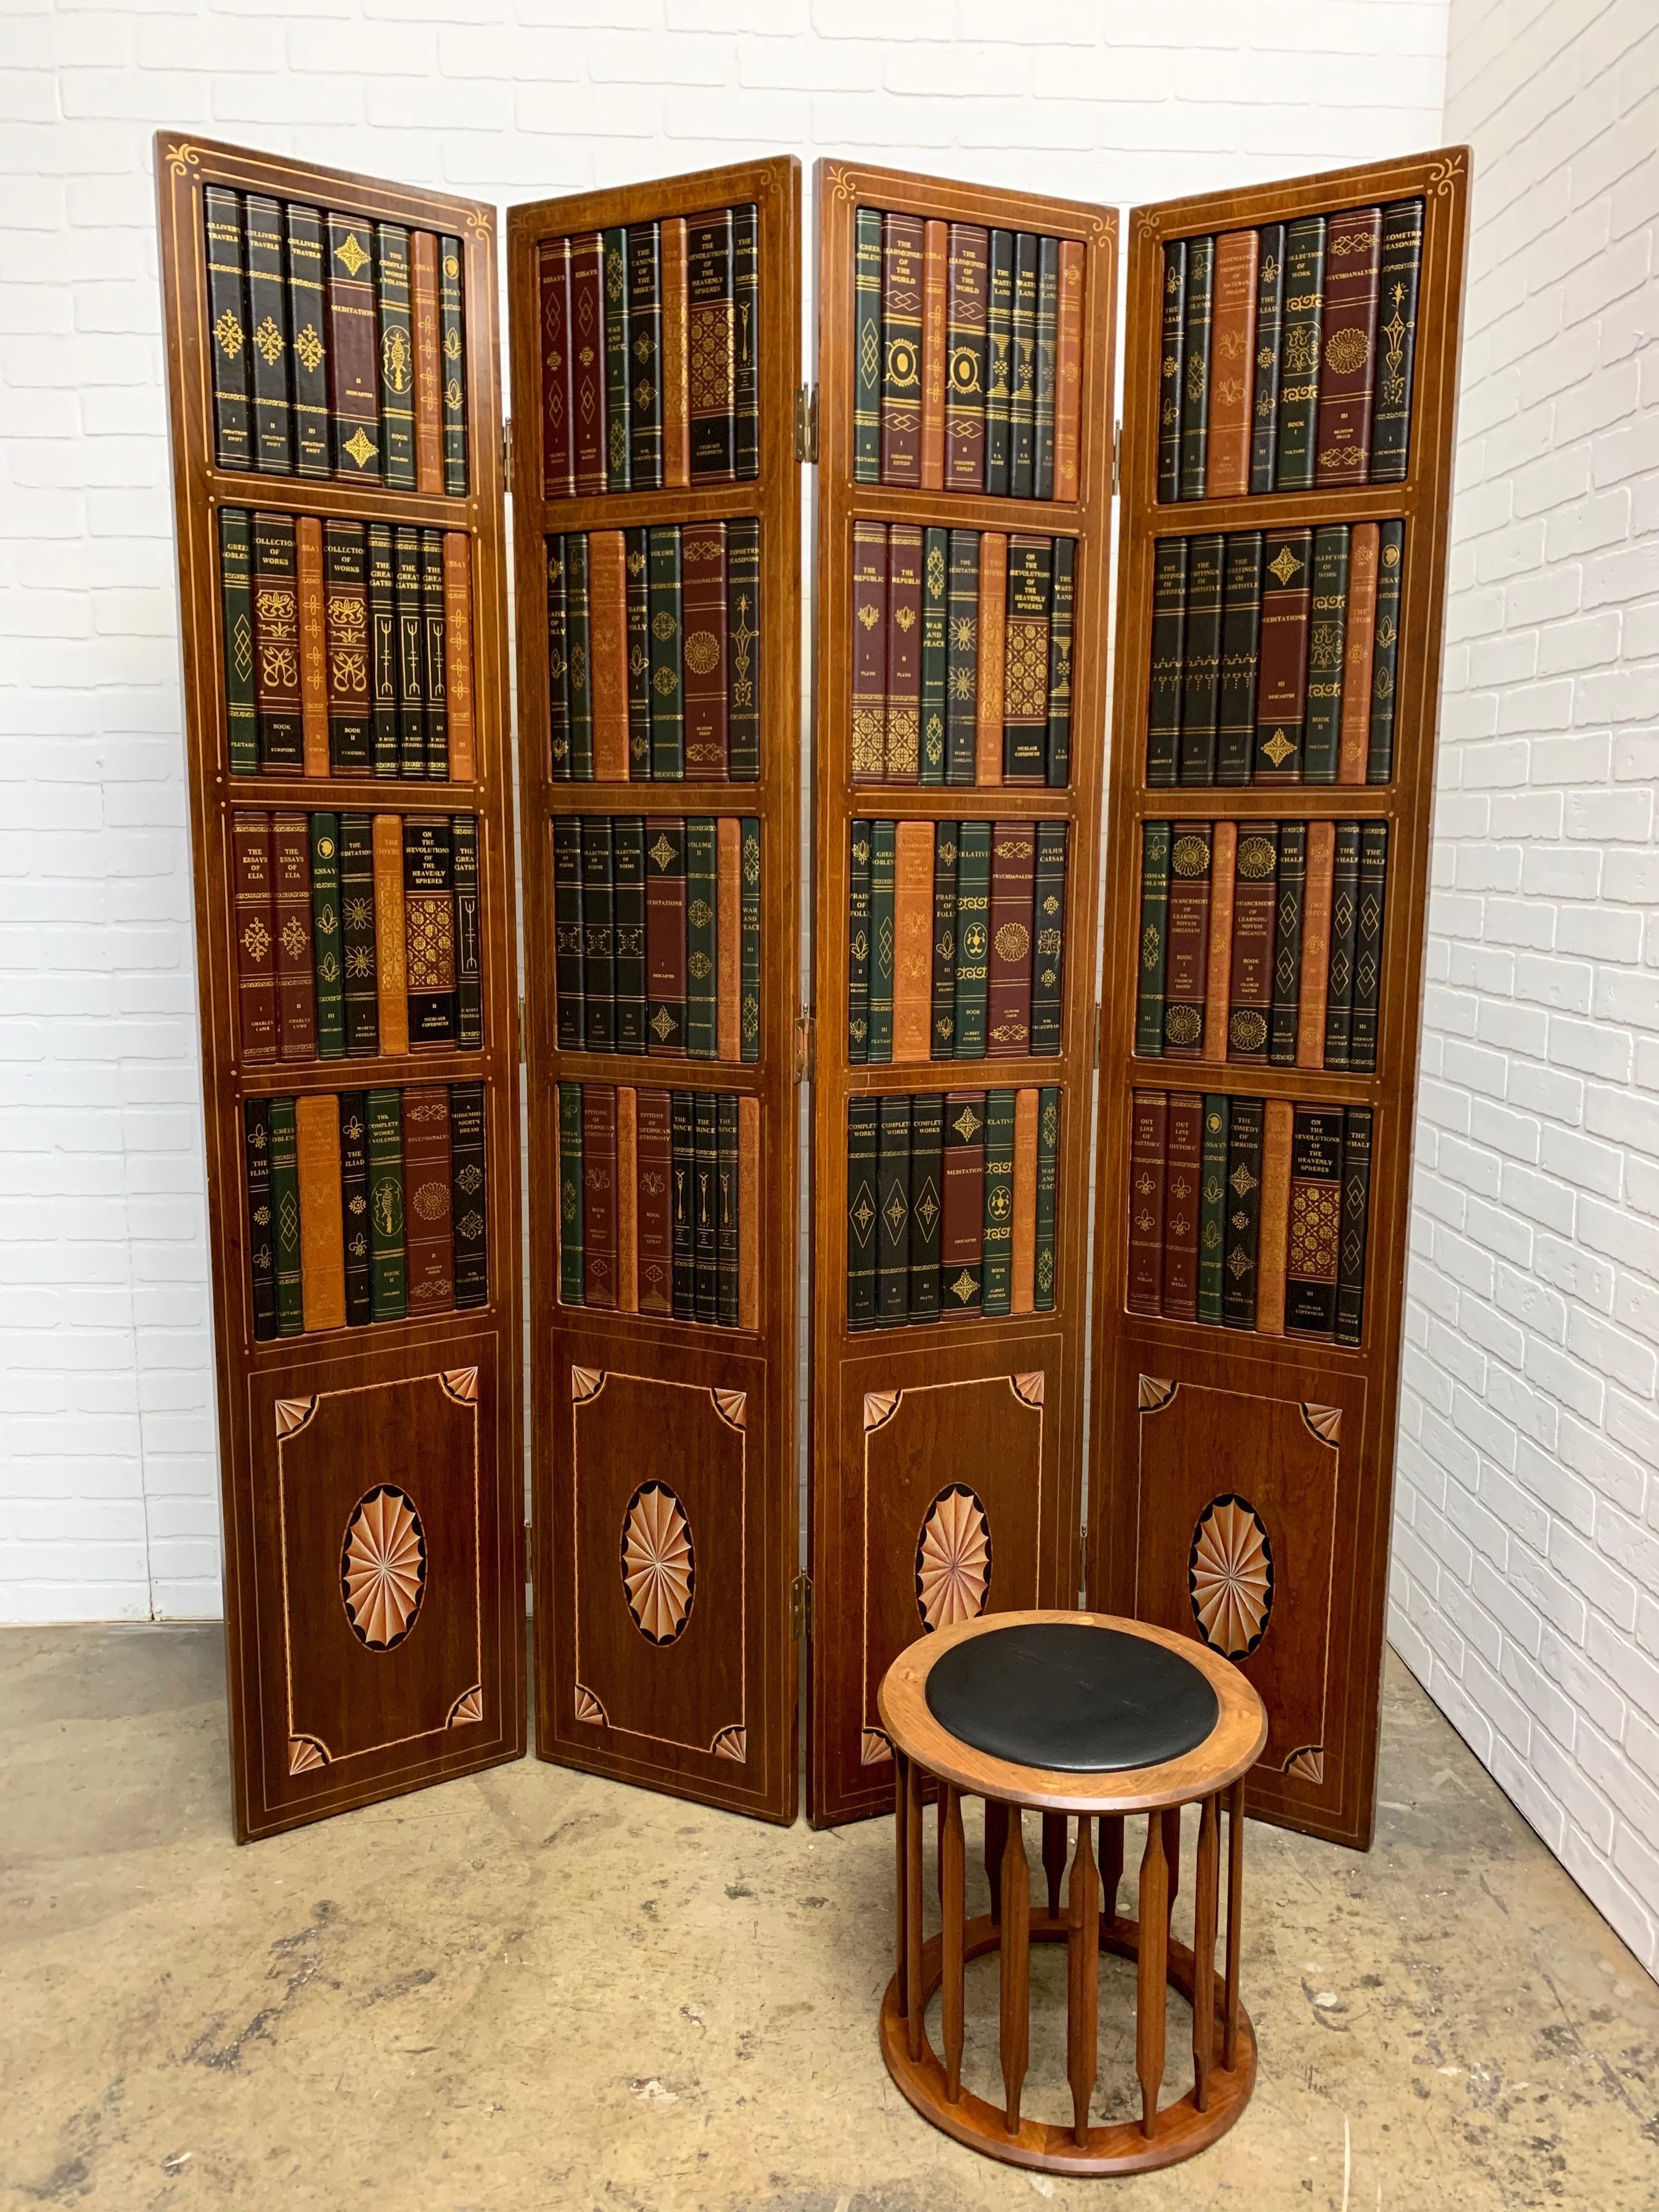 4 panel screen with faux books on the upper panel and inlaid marquetry on the lower panels with some hand painted details.